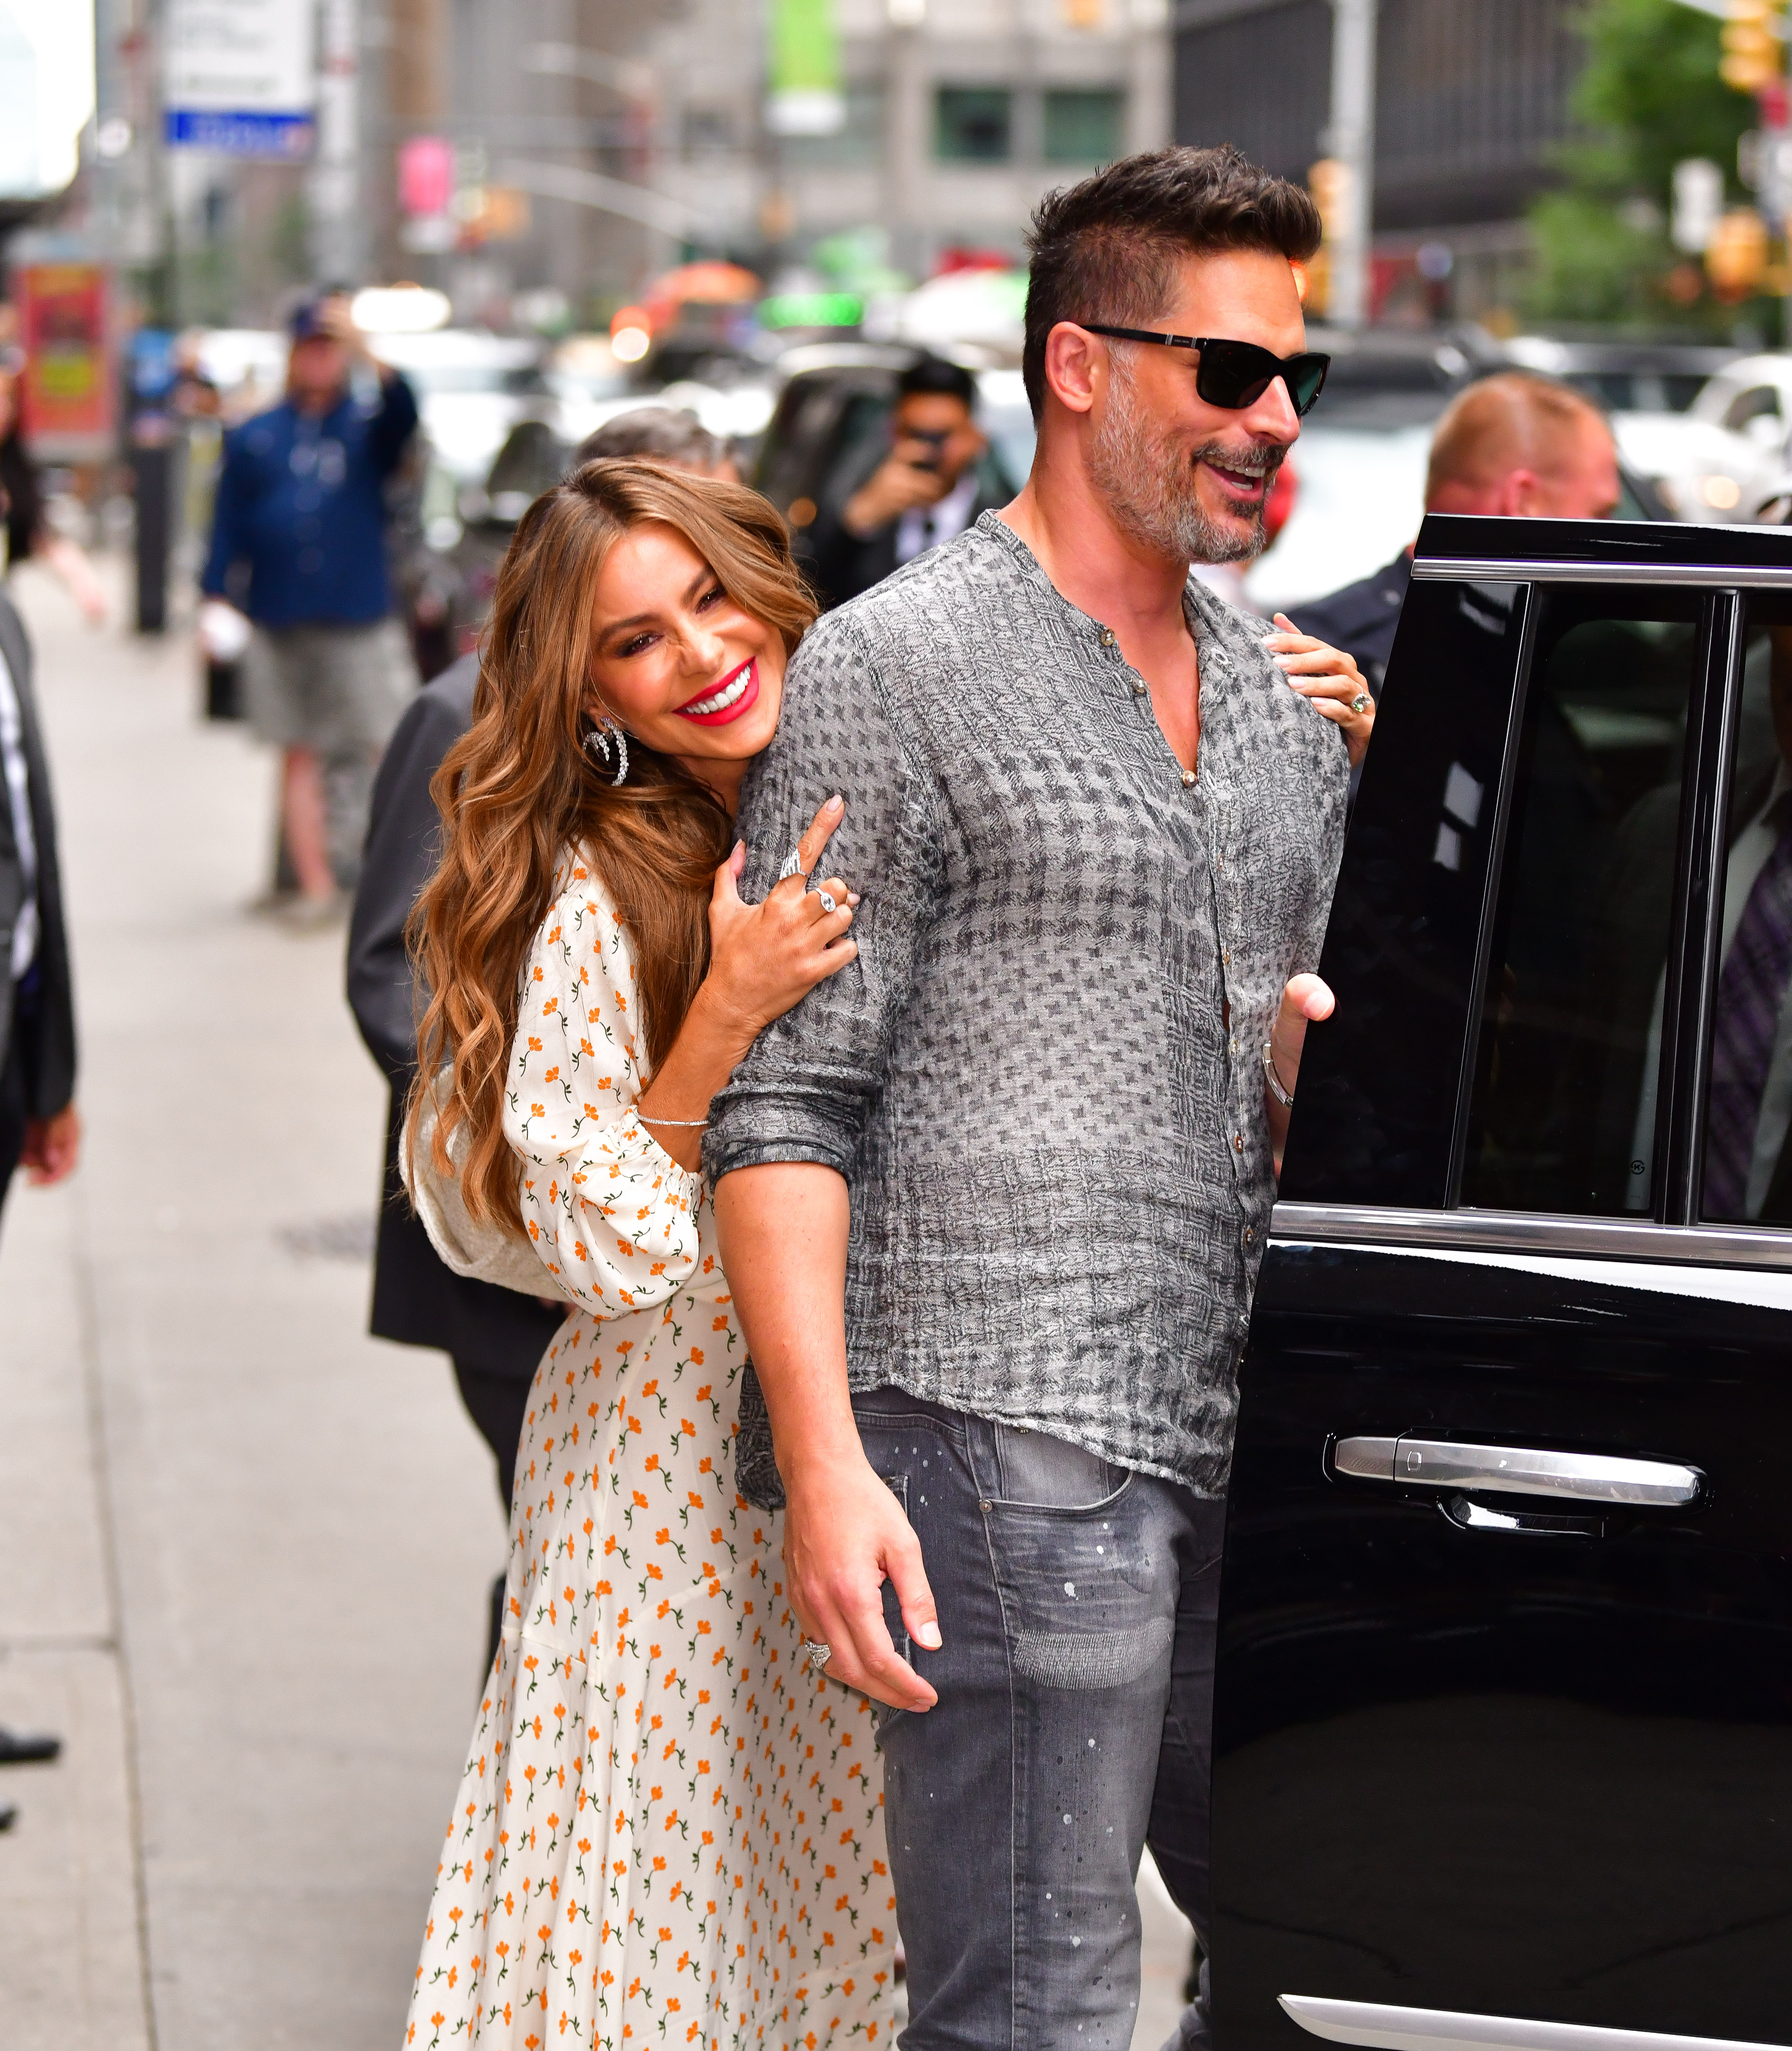 Sofia Vergara and Joe Manganiello leave "The Late Show with Stephen Colbert" on July 17, 2019 in New York City | Source: Getty Images